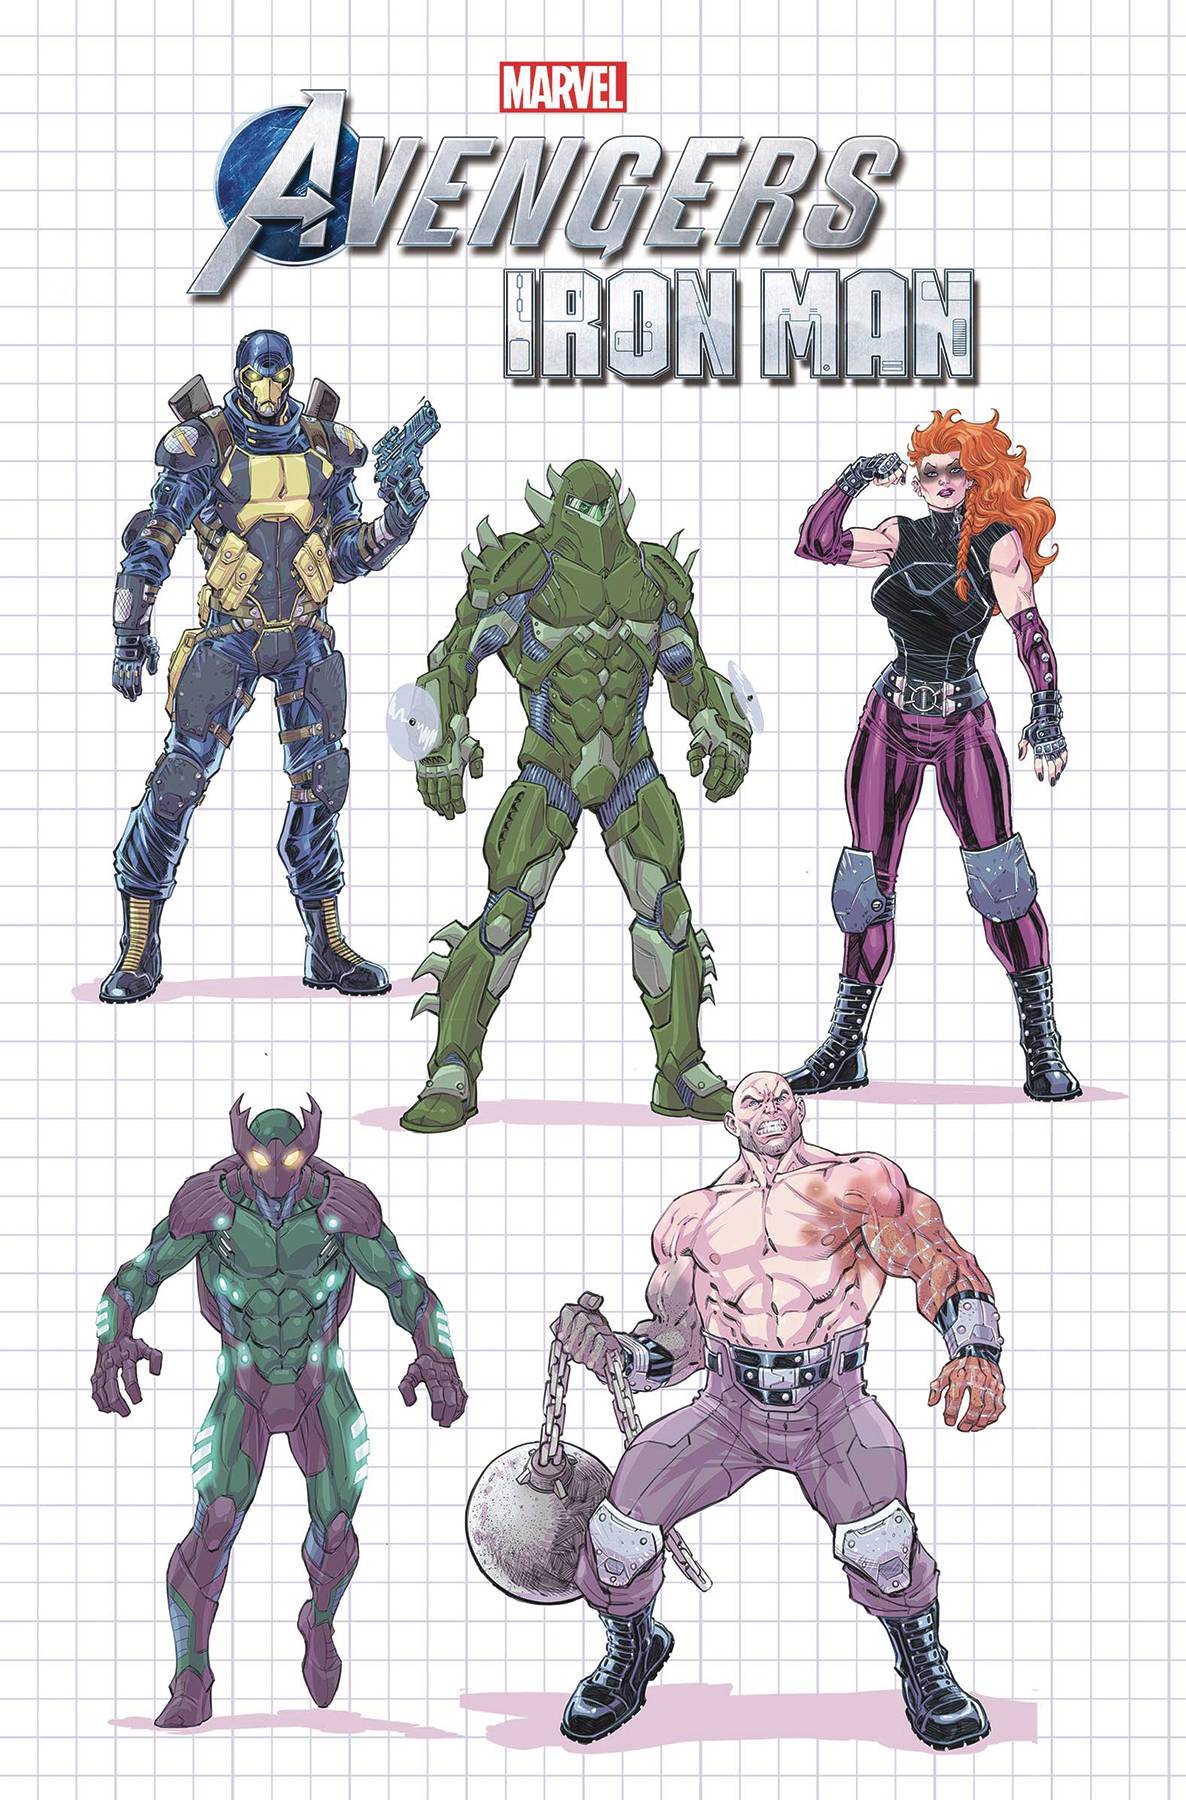 Details about   Marvel Avengers Iron Man # 1 Game Variant Cover 